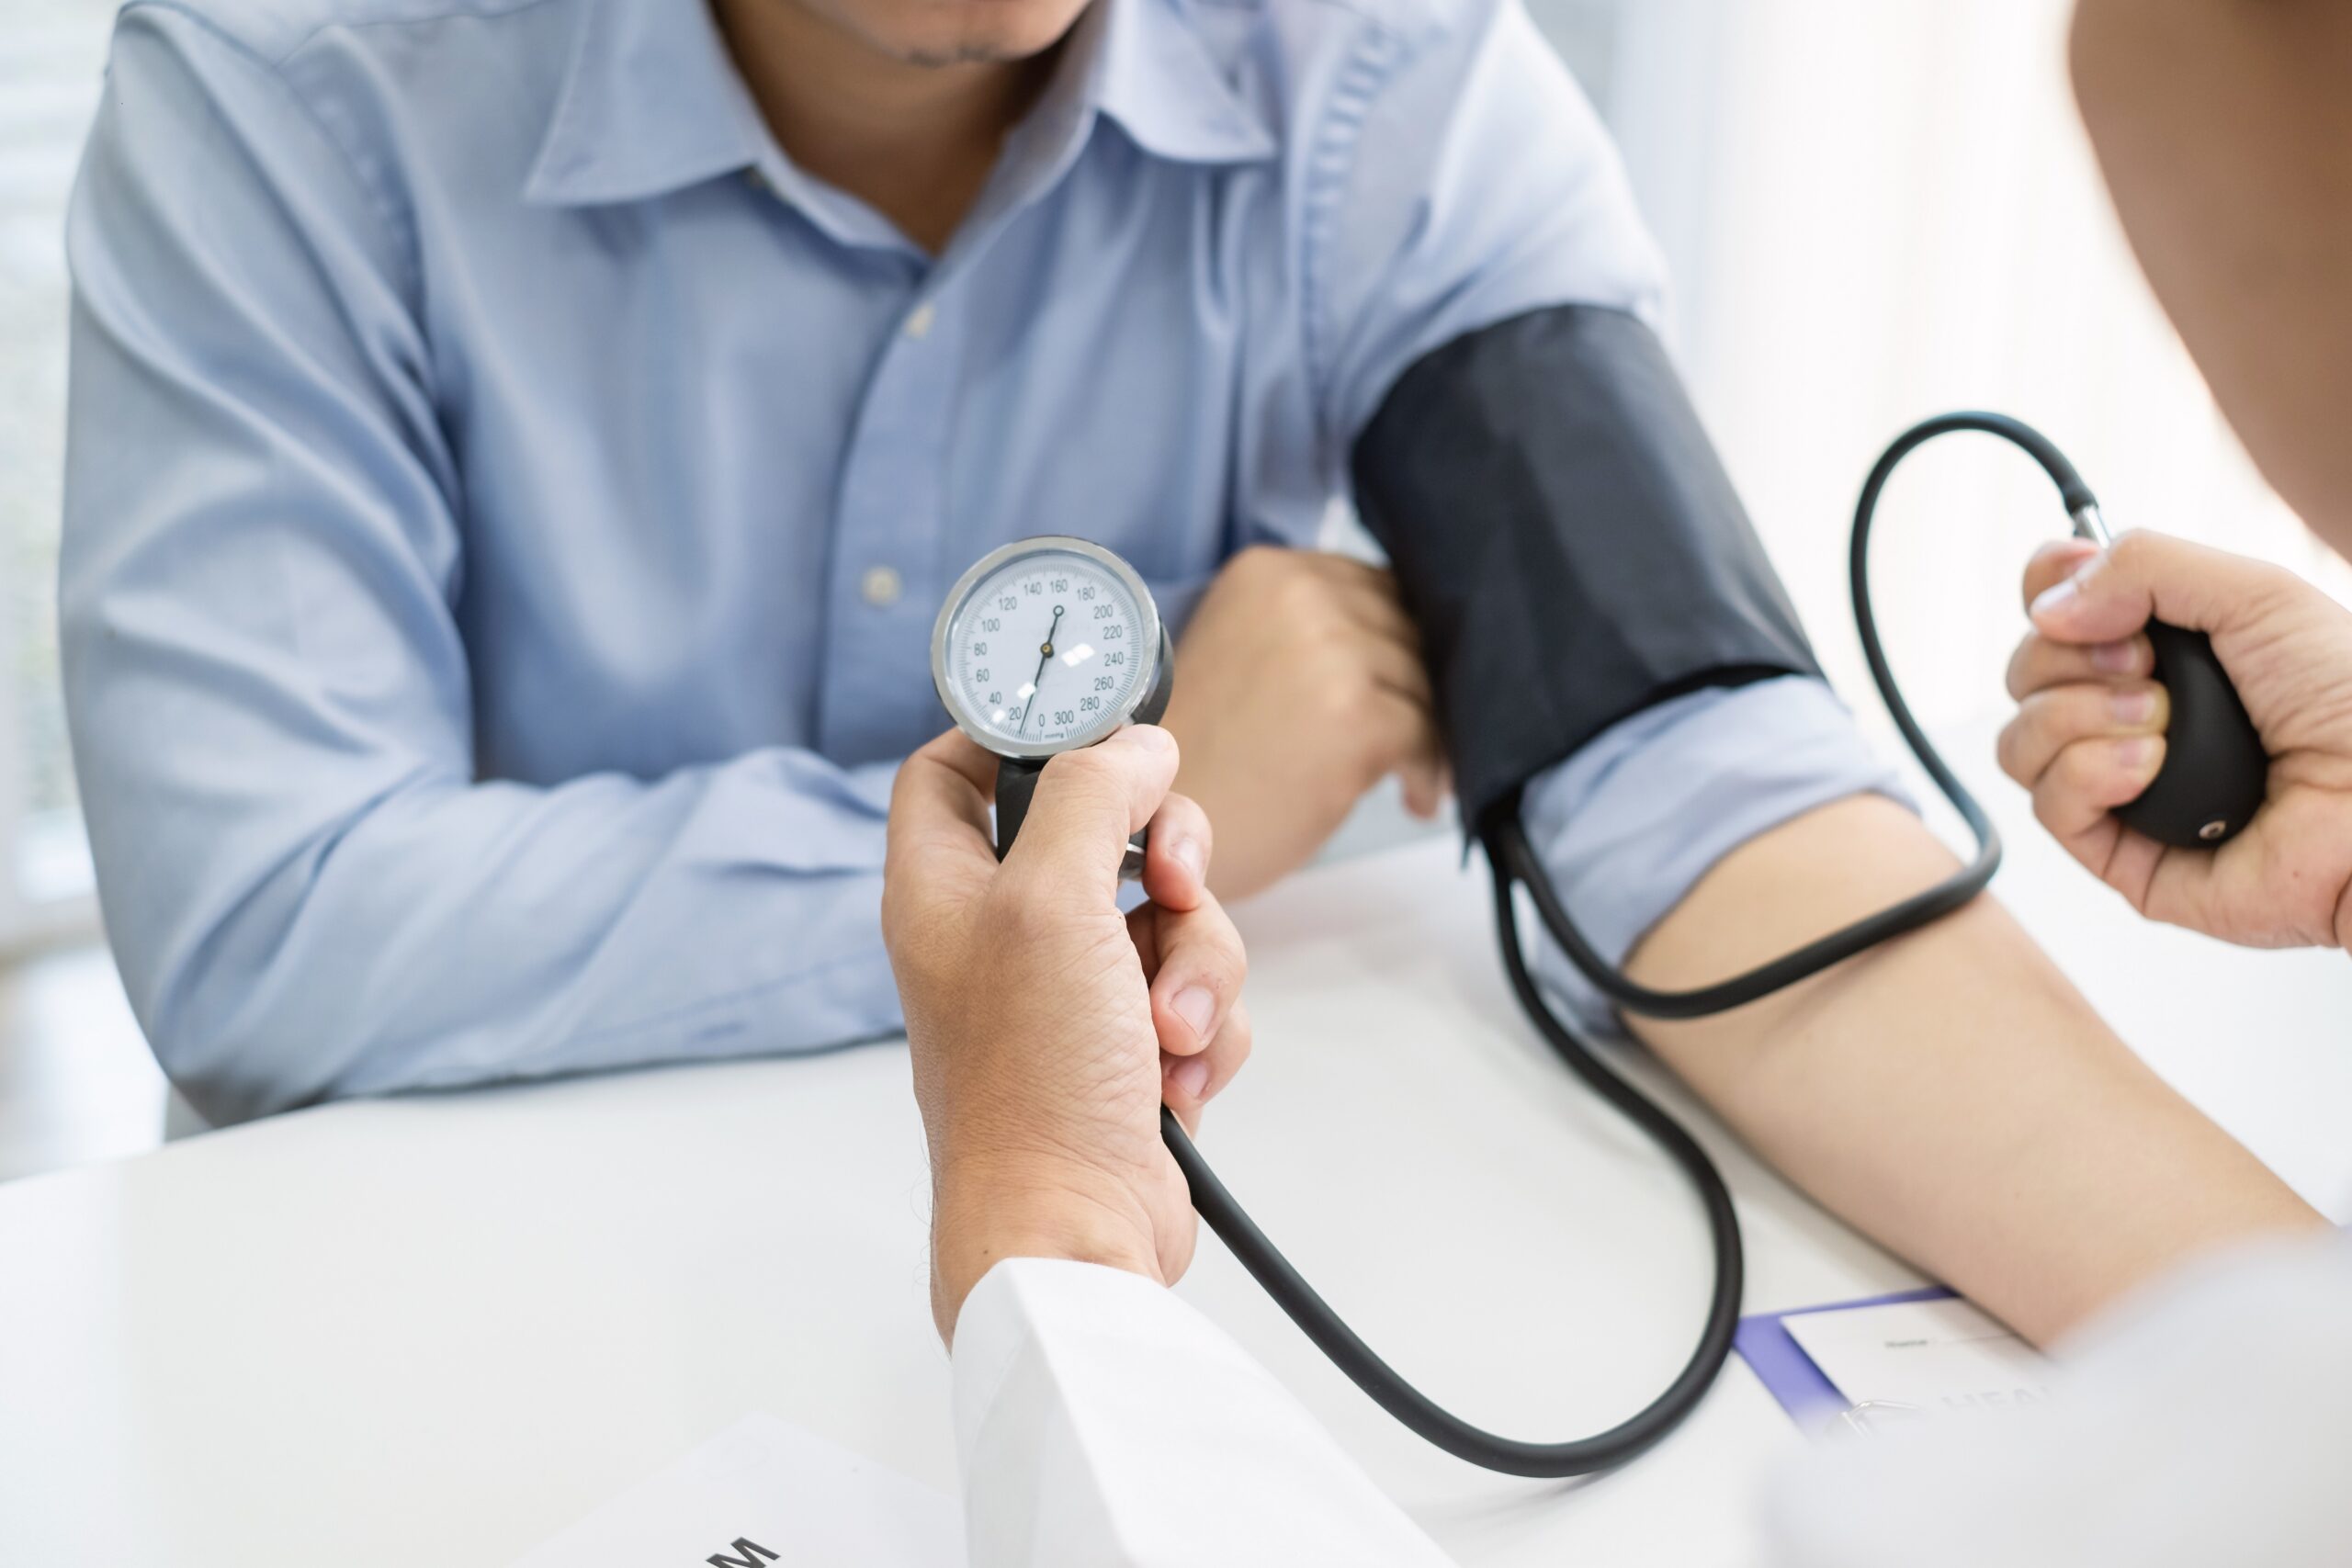 High cholesterol levels and high blood pressure are particularly risky under the age of 55